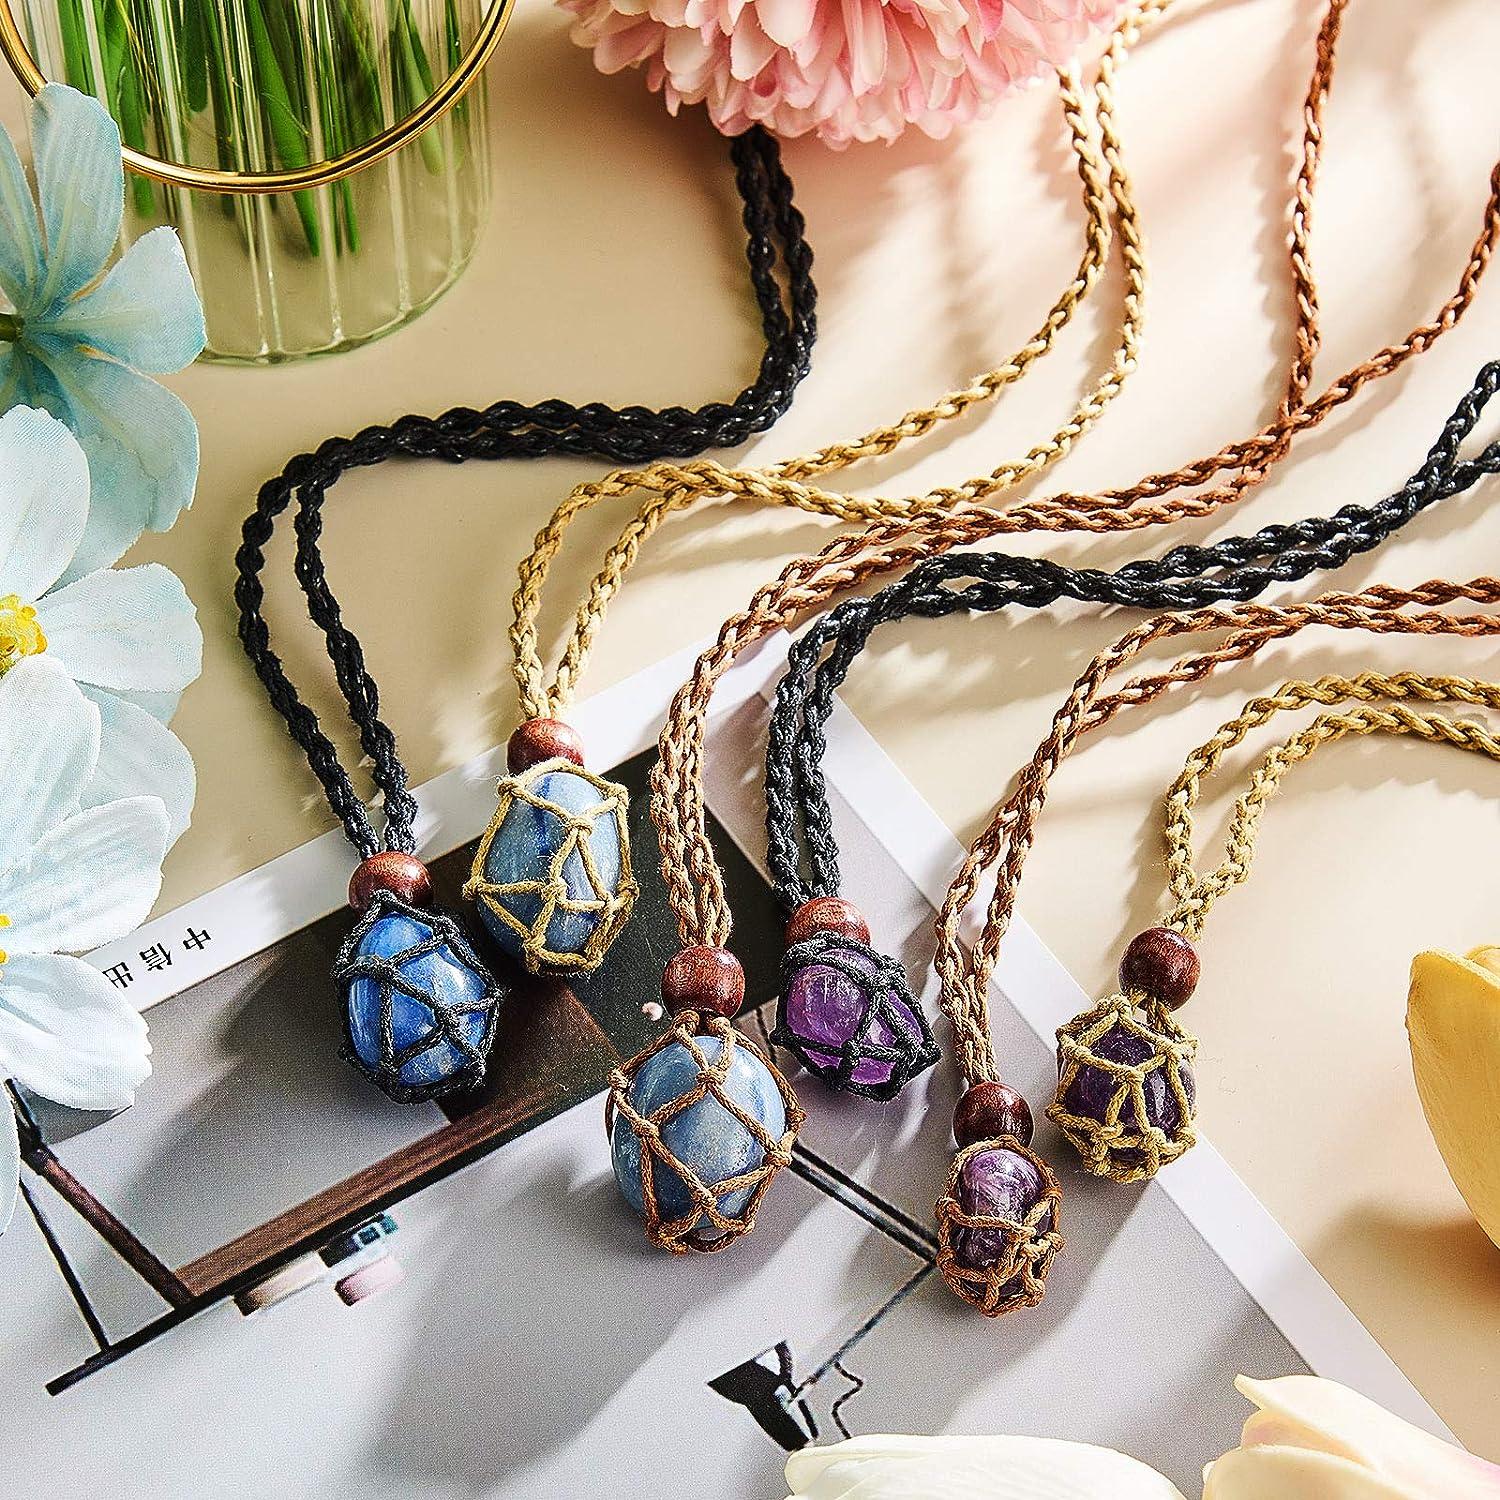 Necklace Cord Empty Stone Holder 3 Sizes Adjustable Crystal Holder Netted  Necklace Cage for Stones Pendant DIY Stone Necklace Bracelets Jewelry  Making